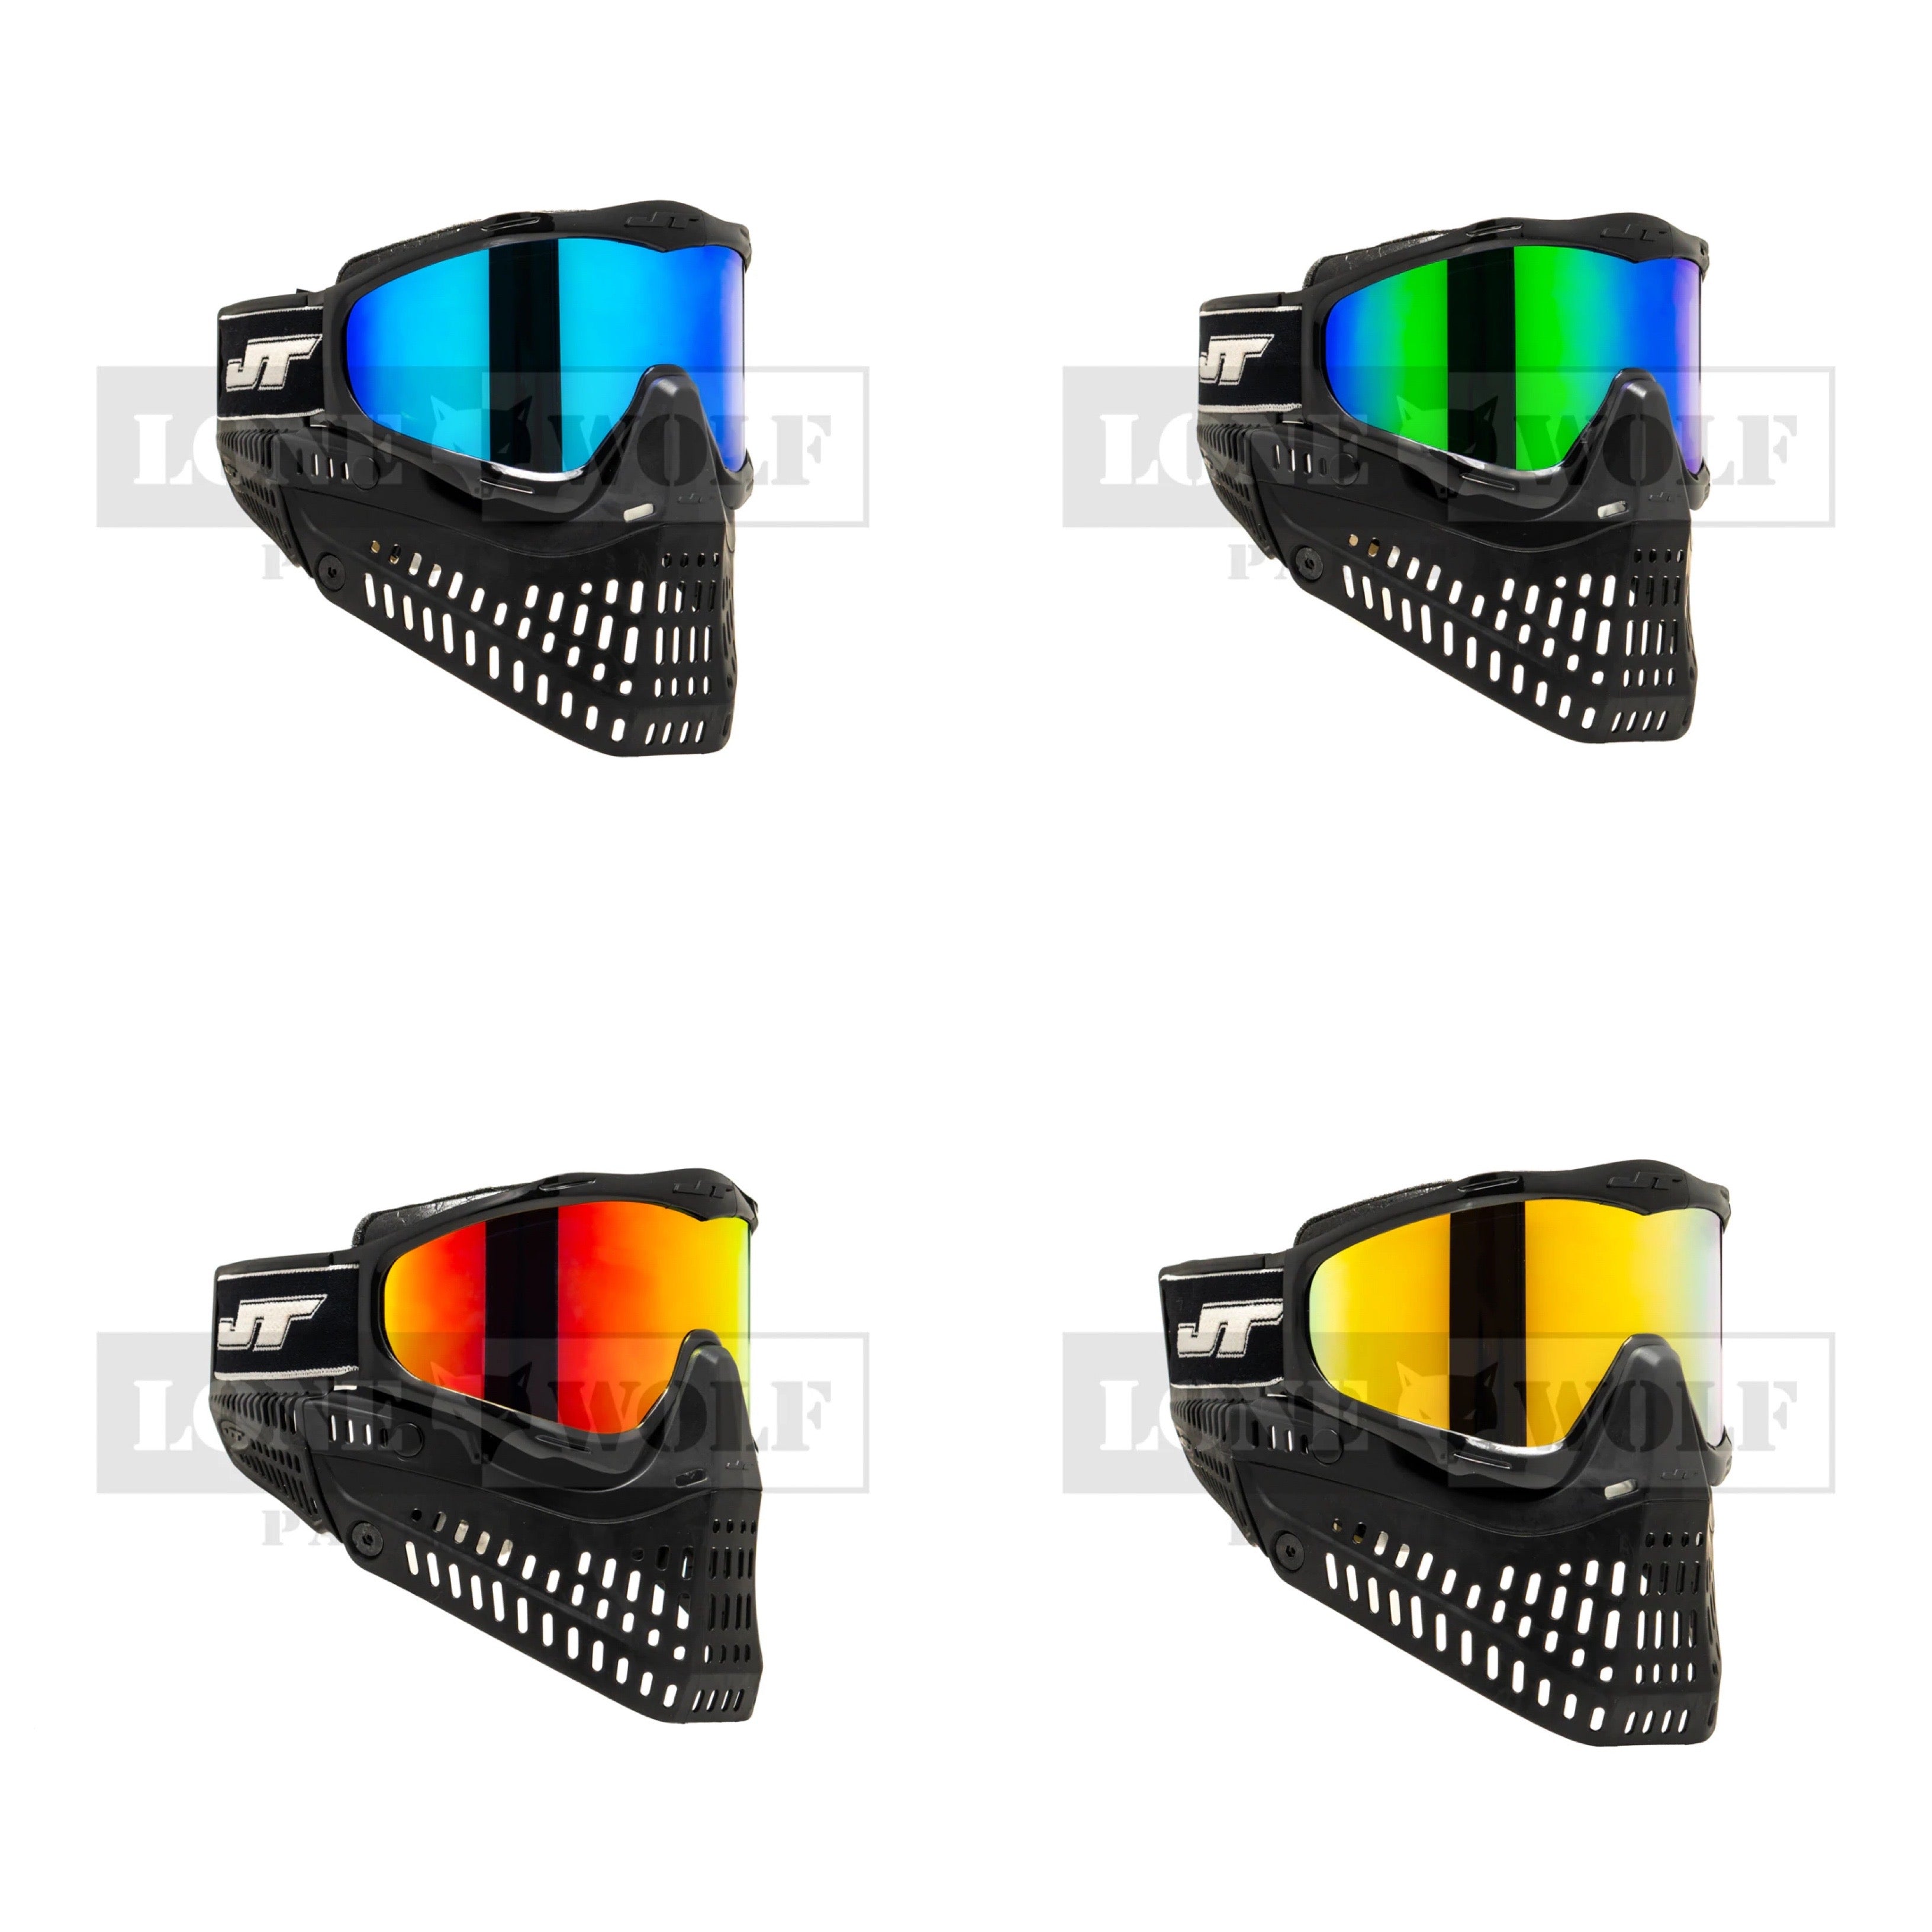 JT Proflex X Paintball Goggle w/ Quick Change System Thermal Lens